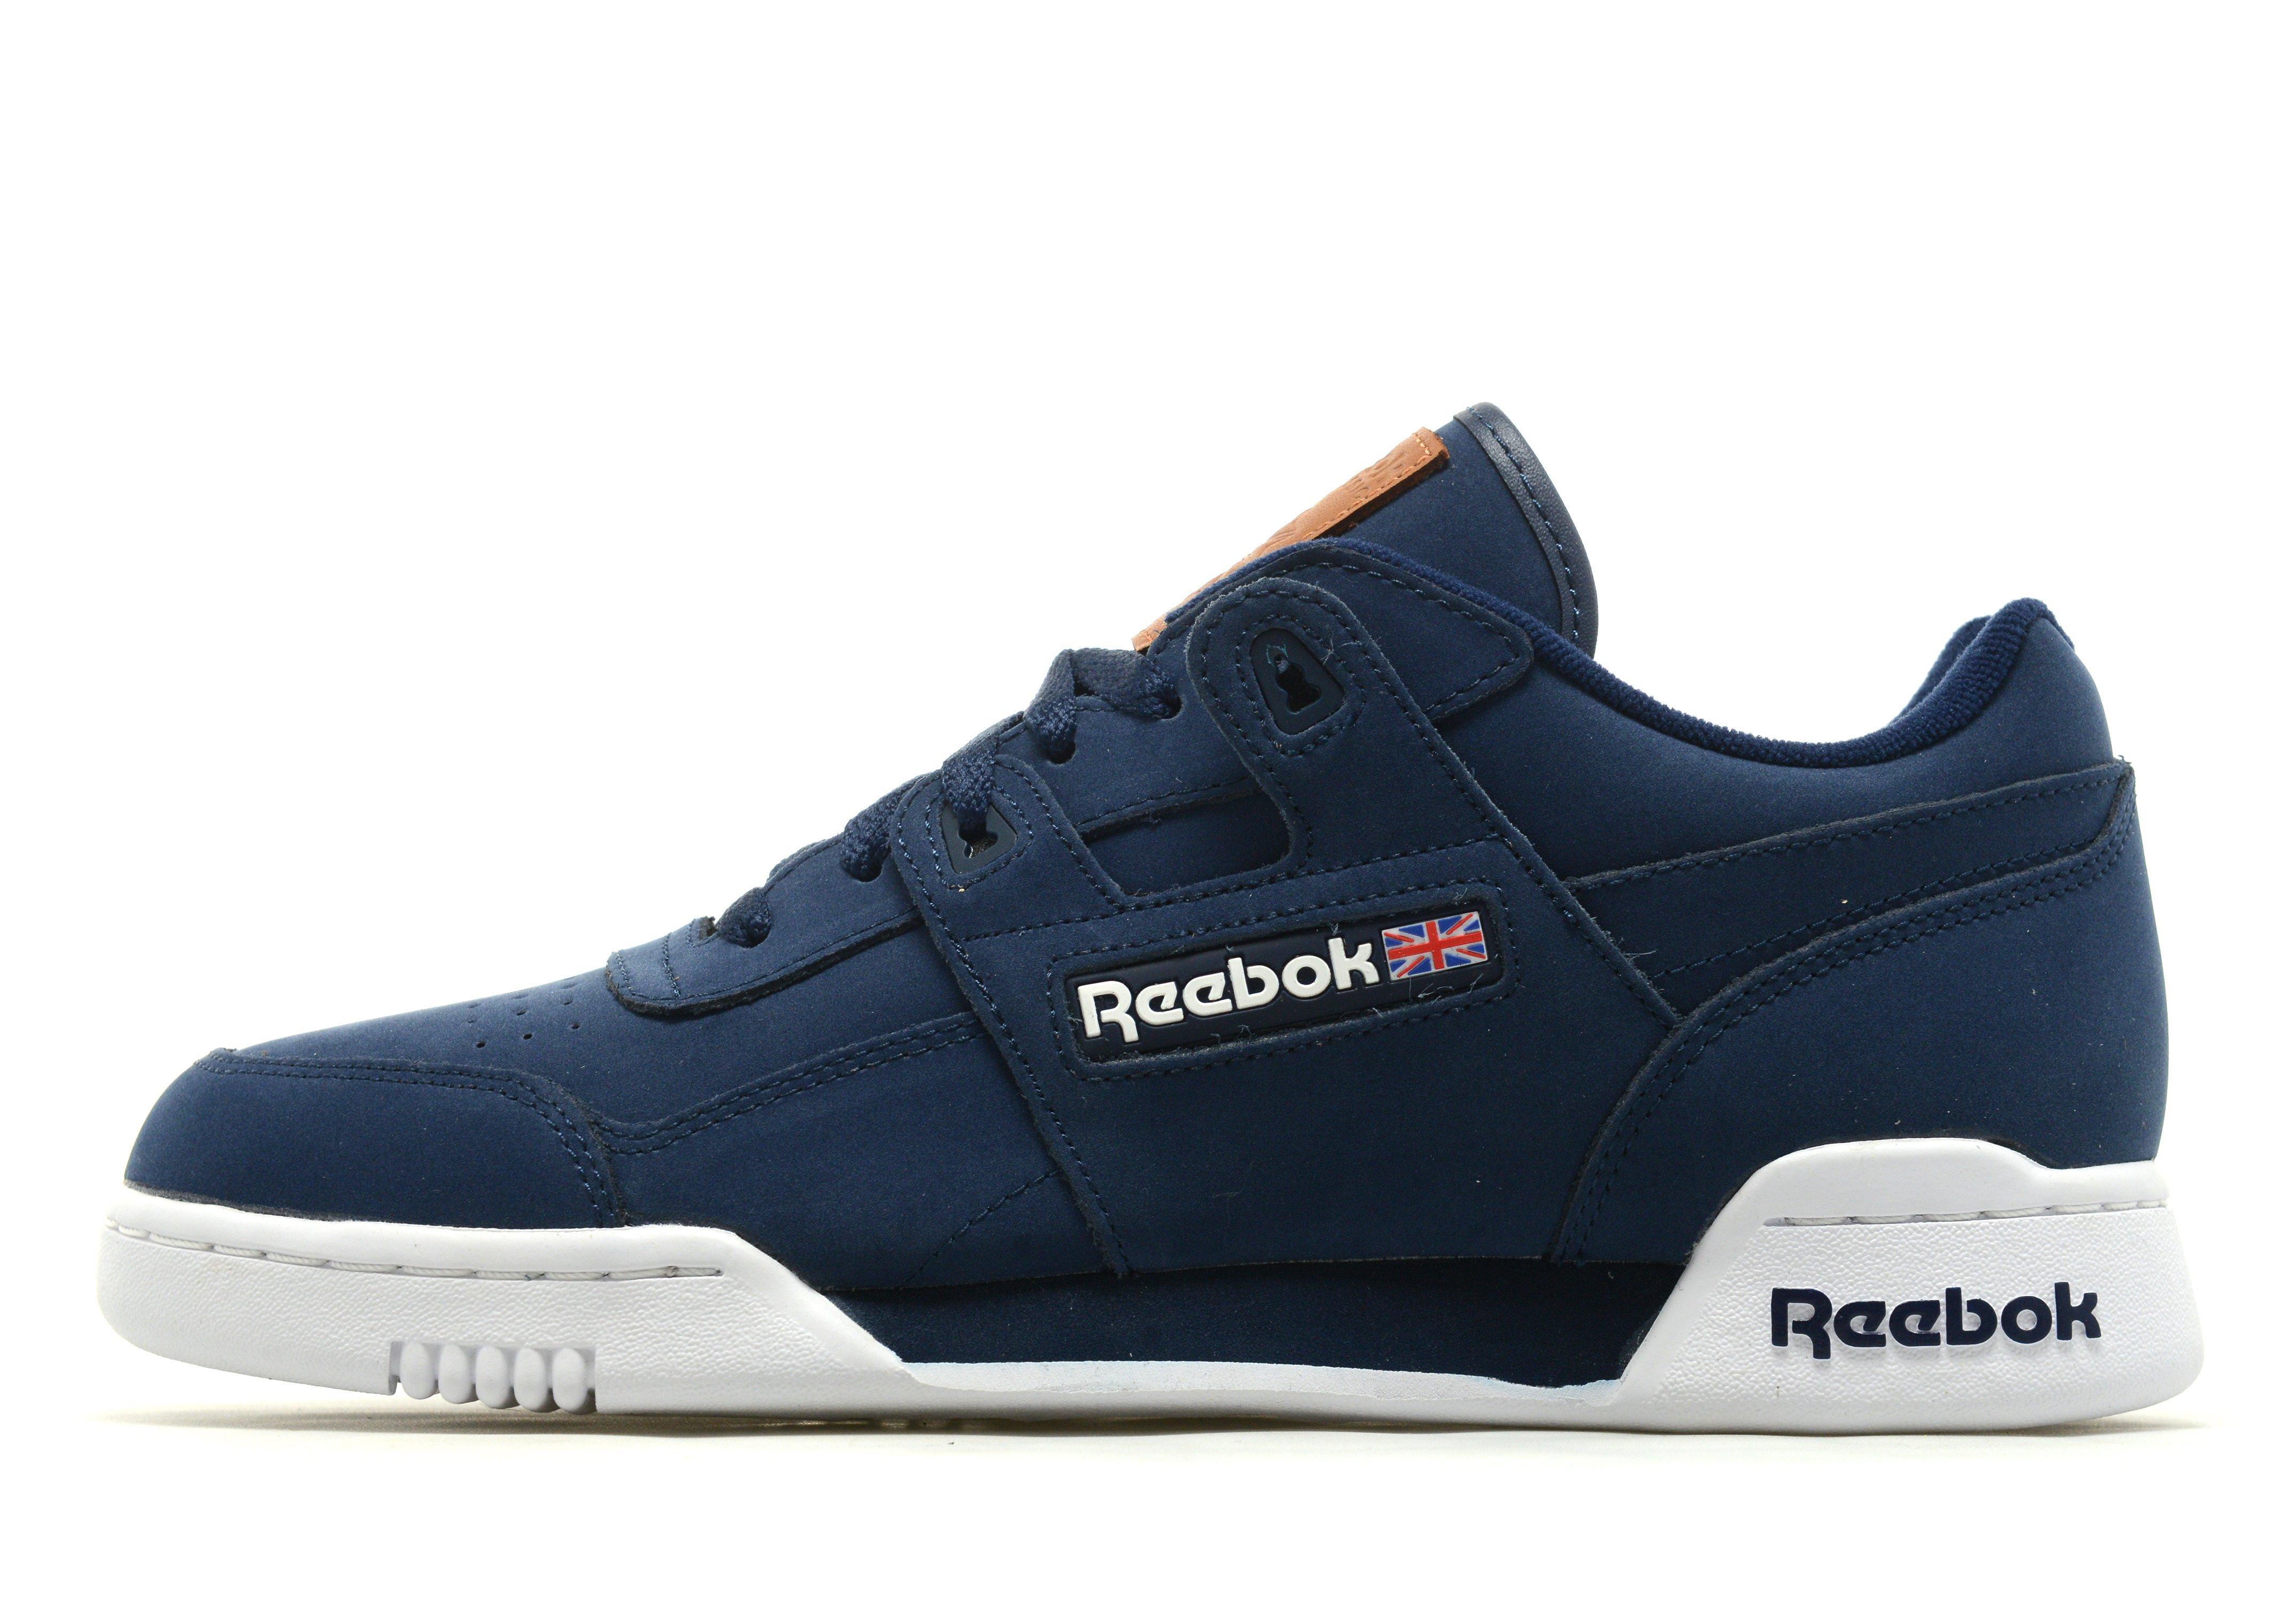 15 Minute Reebok Workout Plus Blue for Push Pull Legs